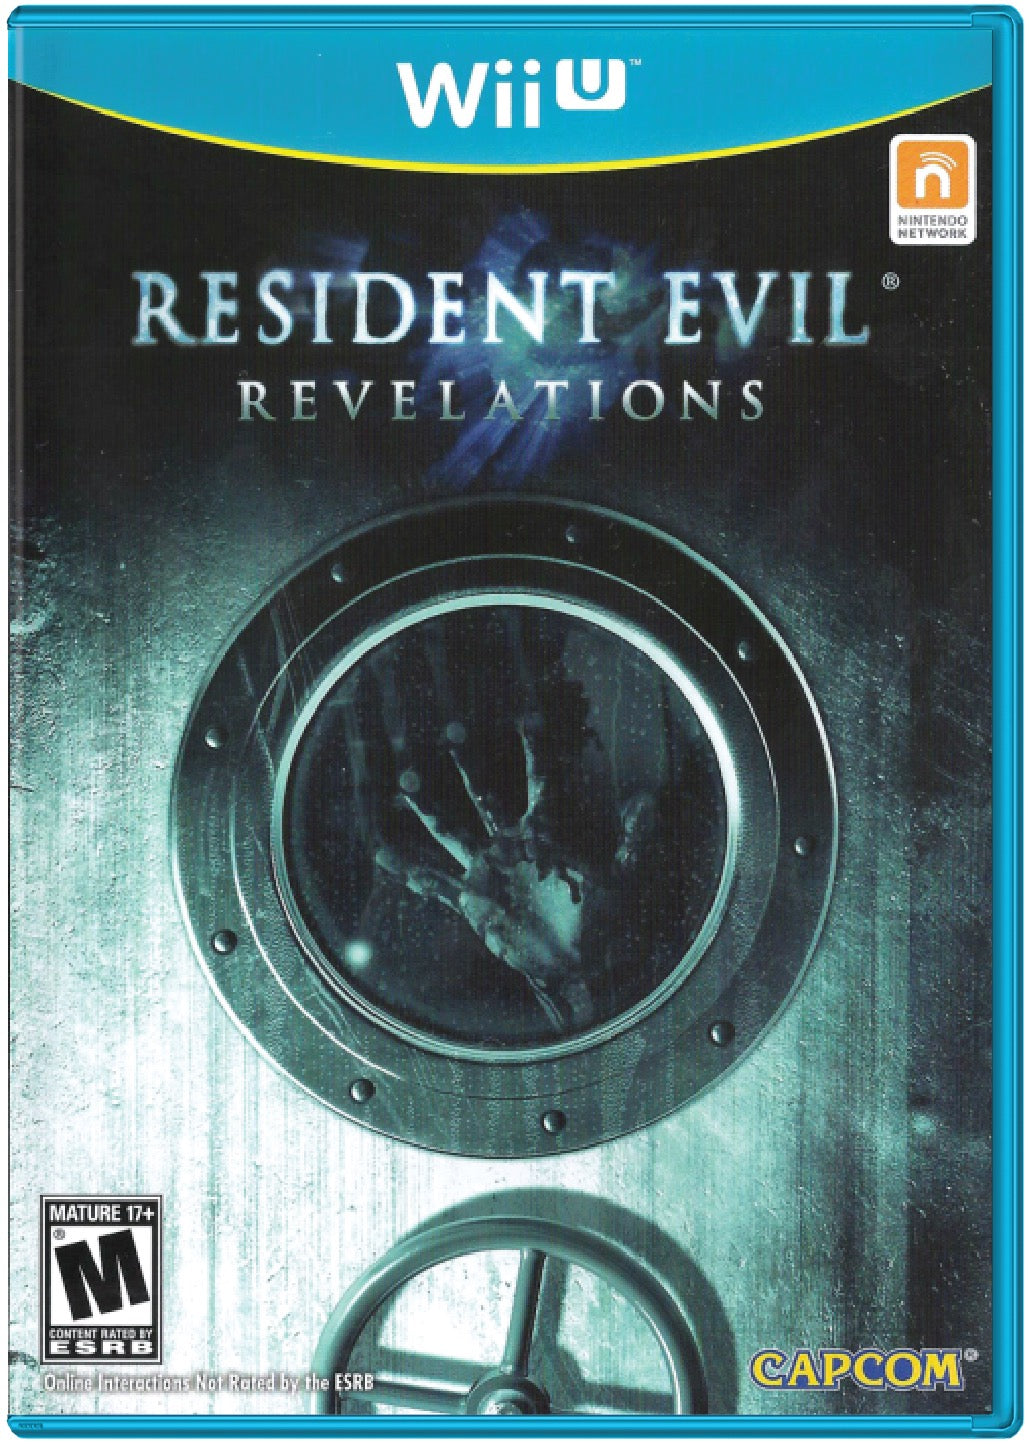 Resident Evil Revelations Cover Art and Product Photo